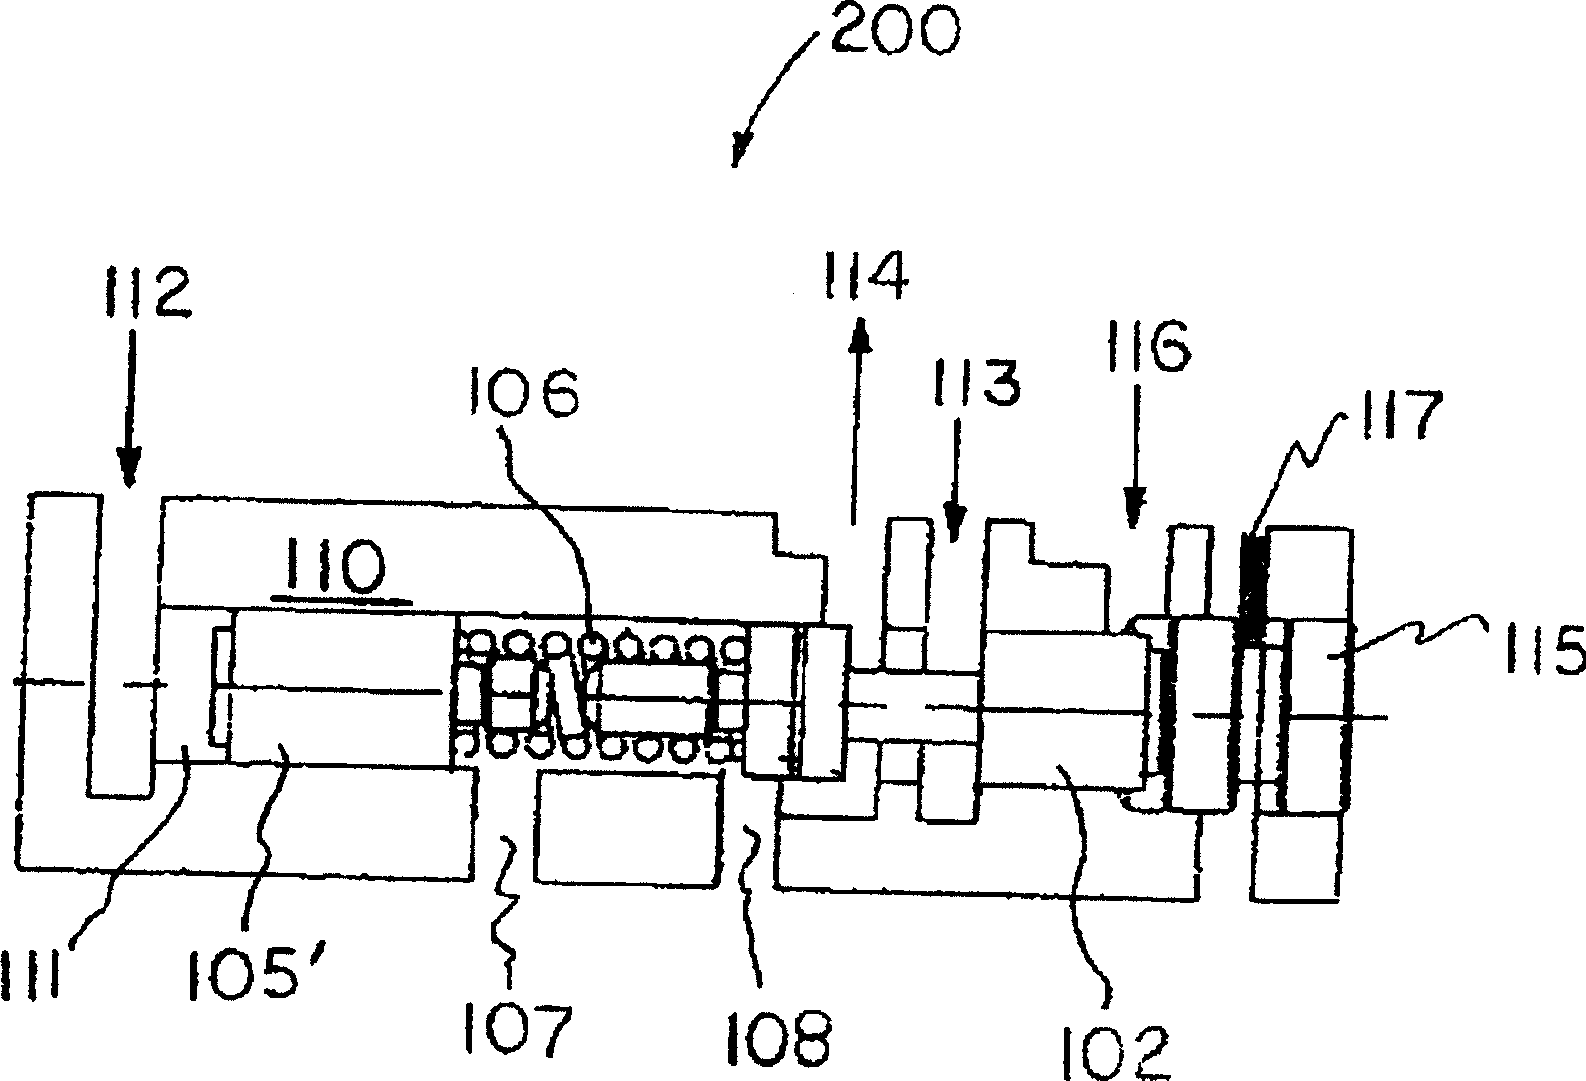 Torque converter clutch regulating valve assembly and method of increasing hydraulic pressure using the same